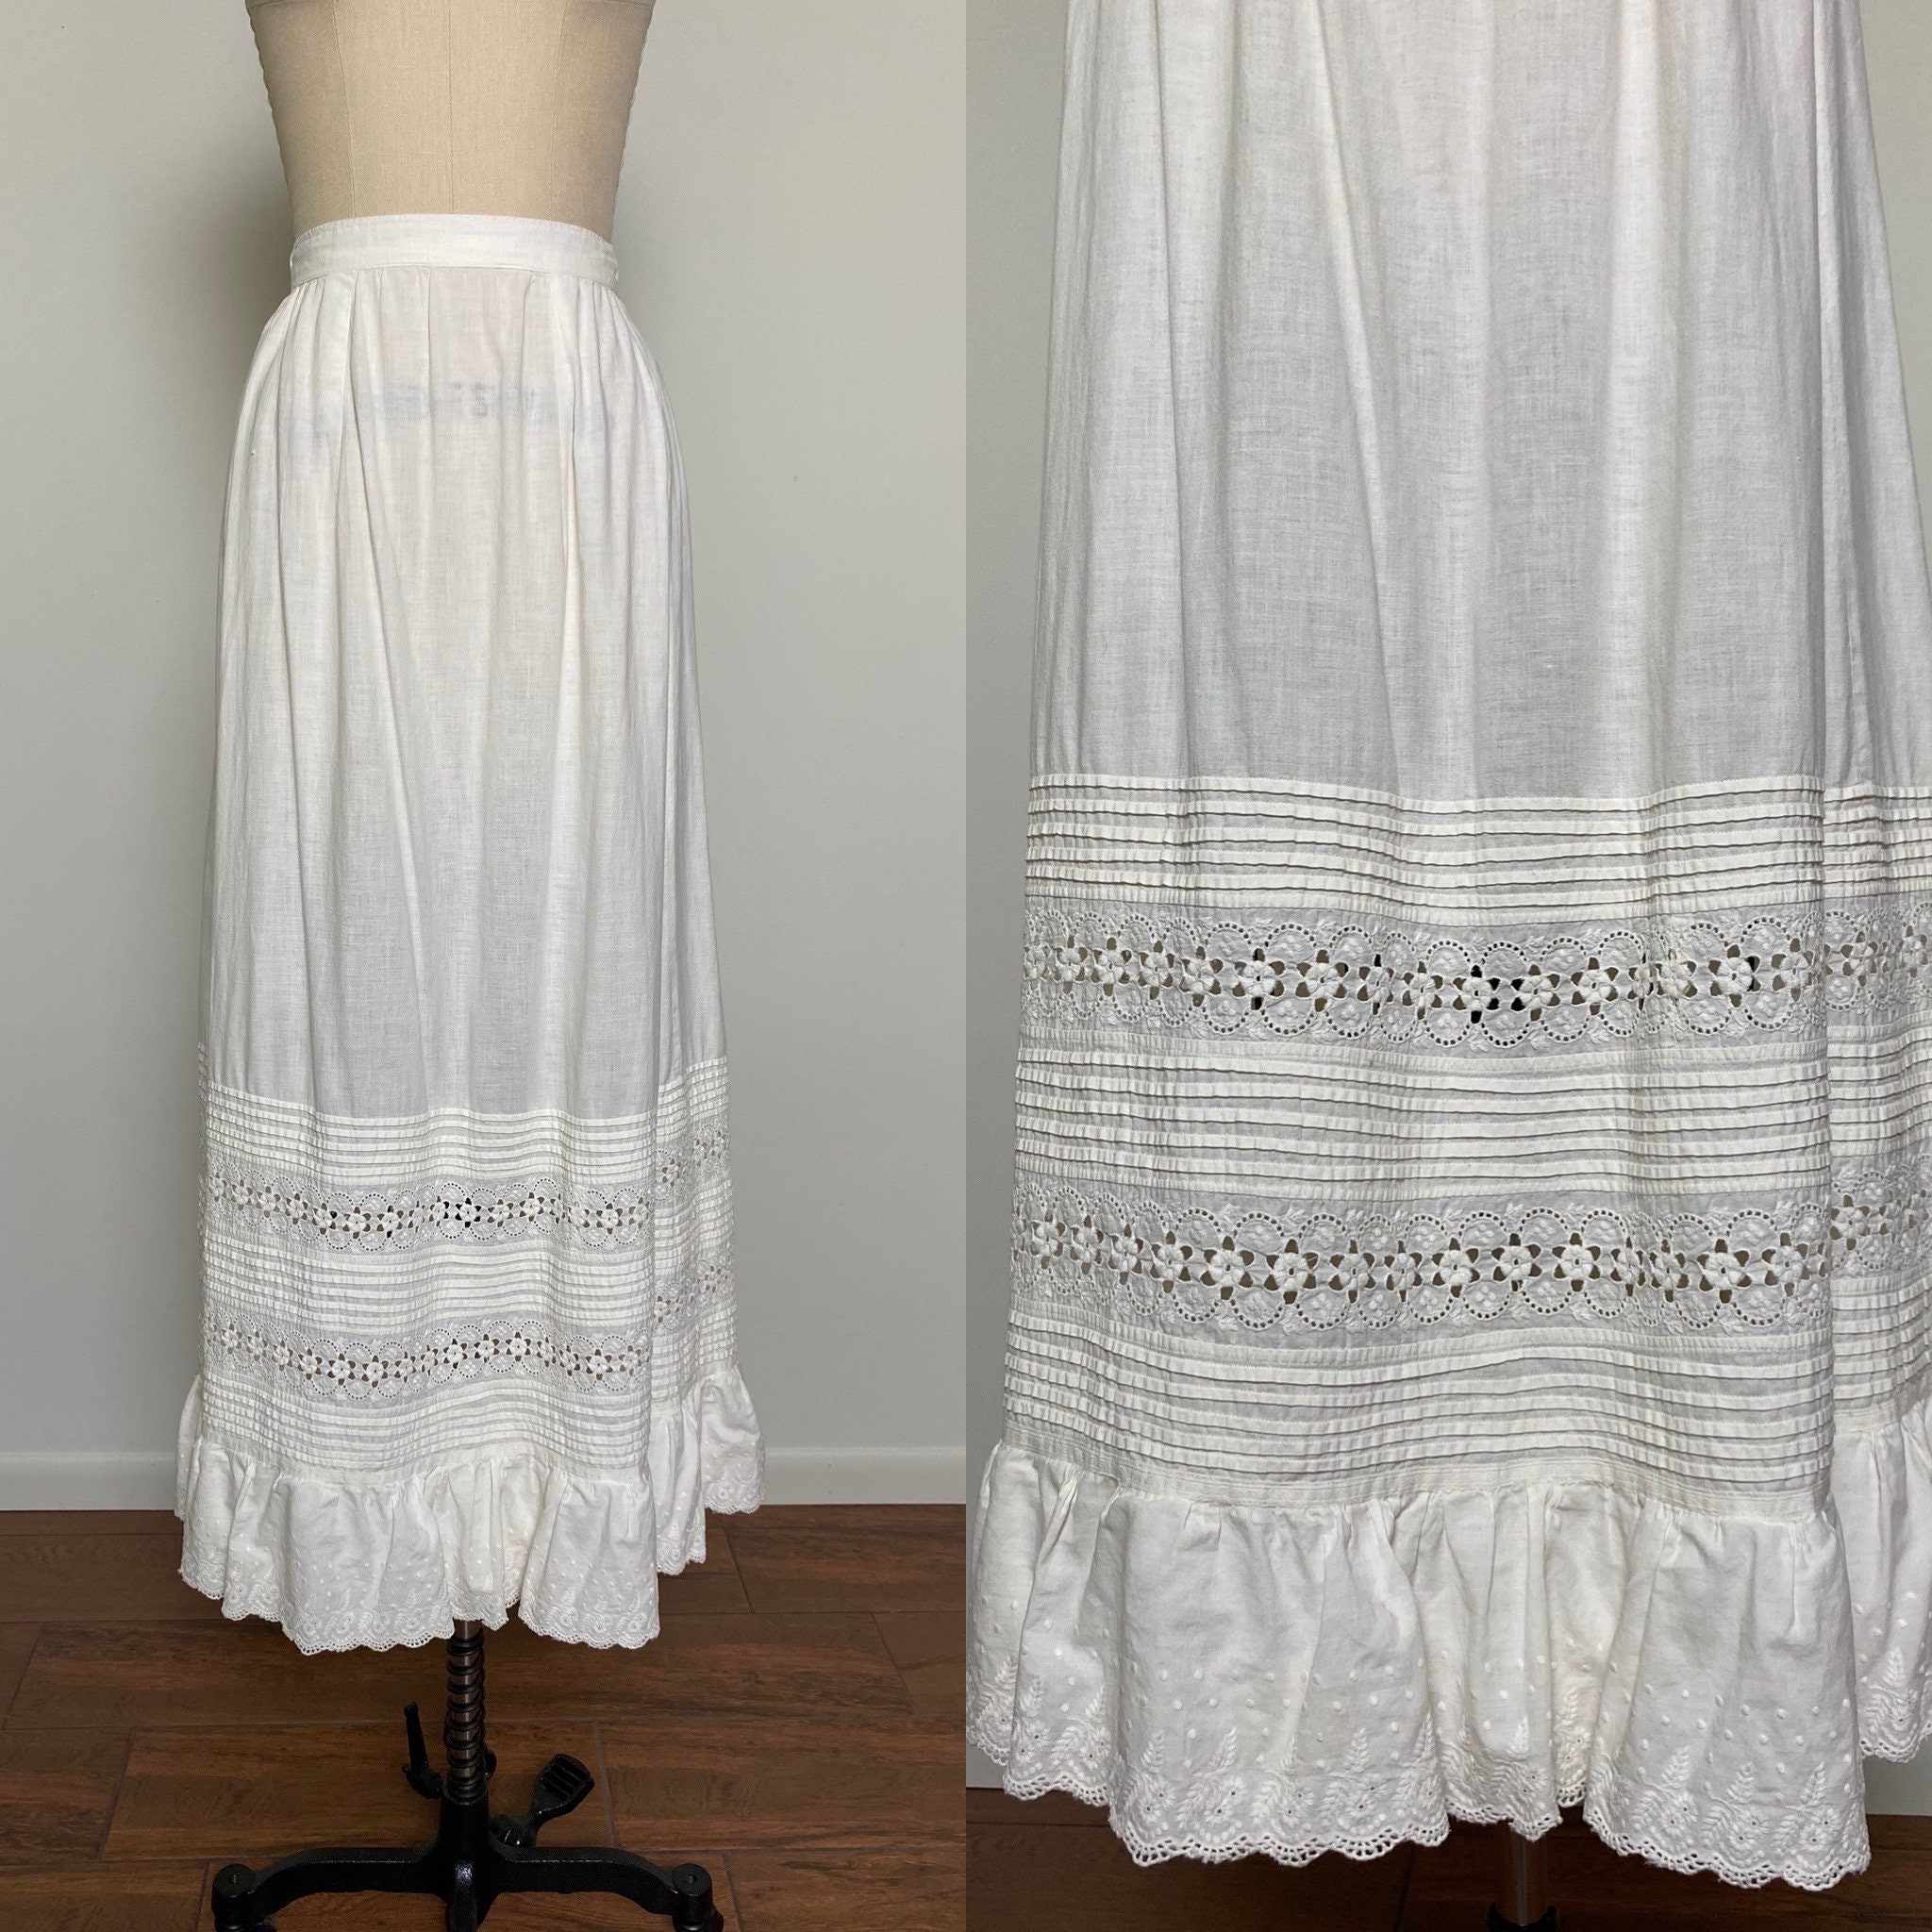 Edwardian Drawstring Waist Skirt with Lace & Pin Tucks Antique White Cotton Eyelet Lace Petticoat Broderie Anglaise Midi Length Underskirt